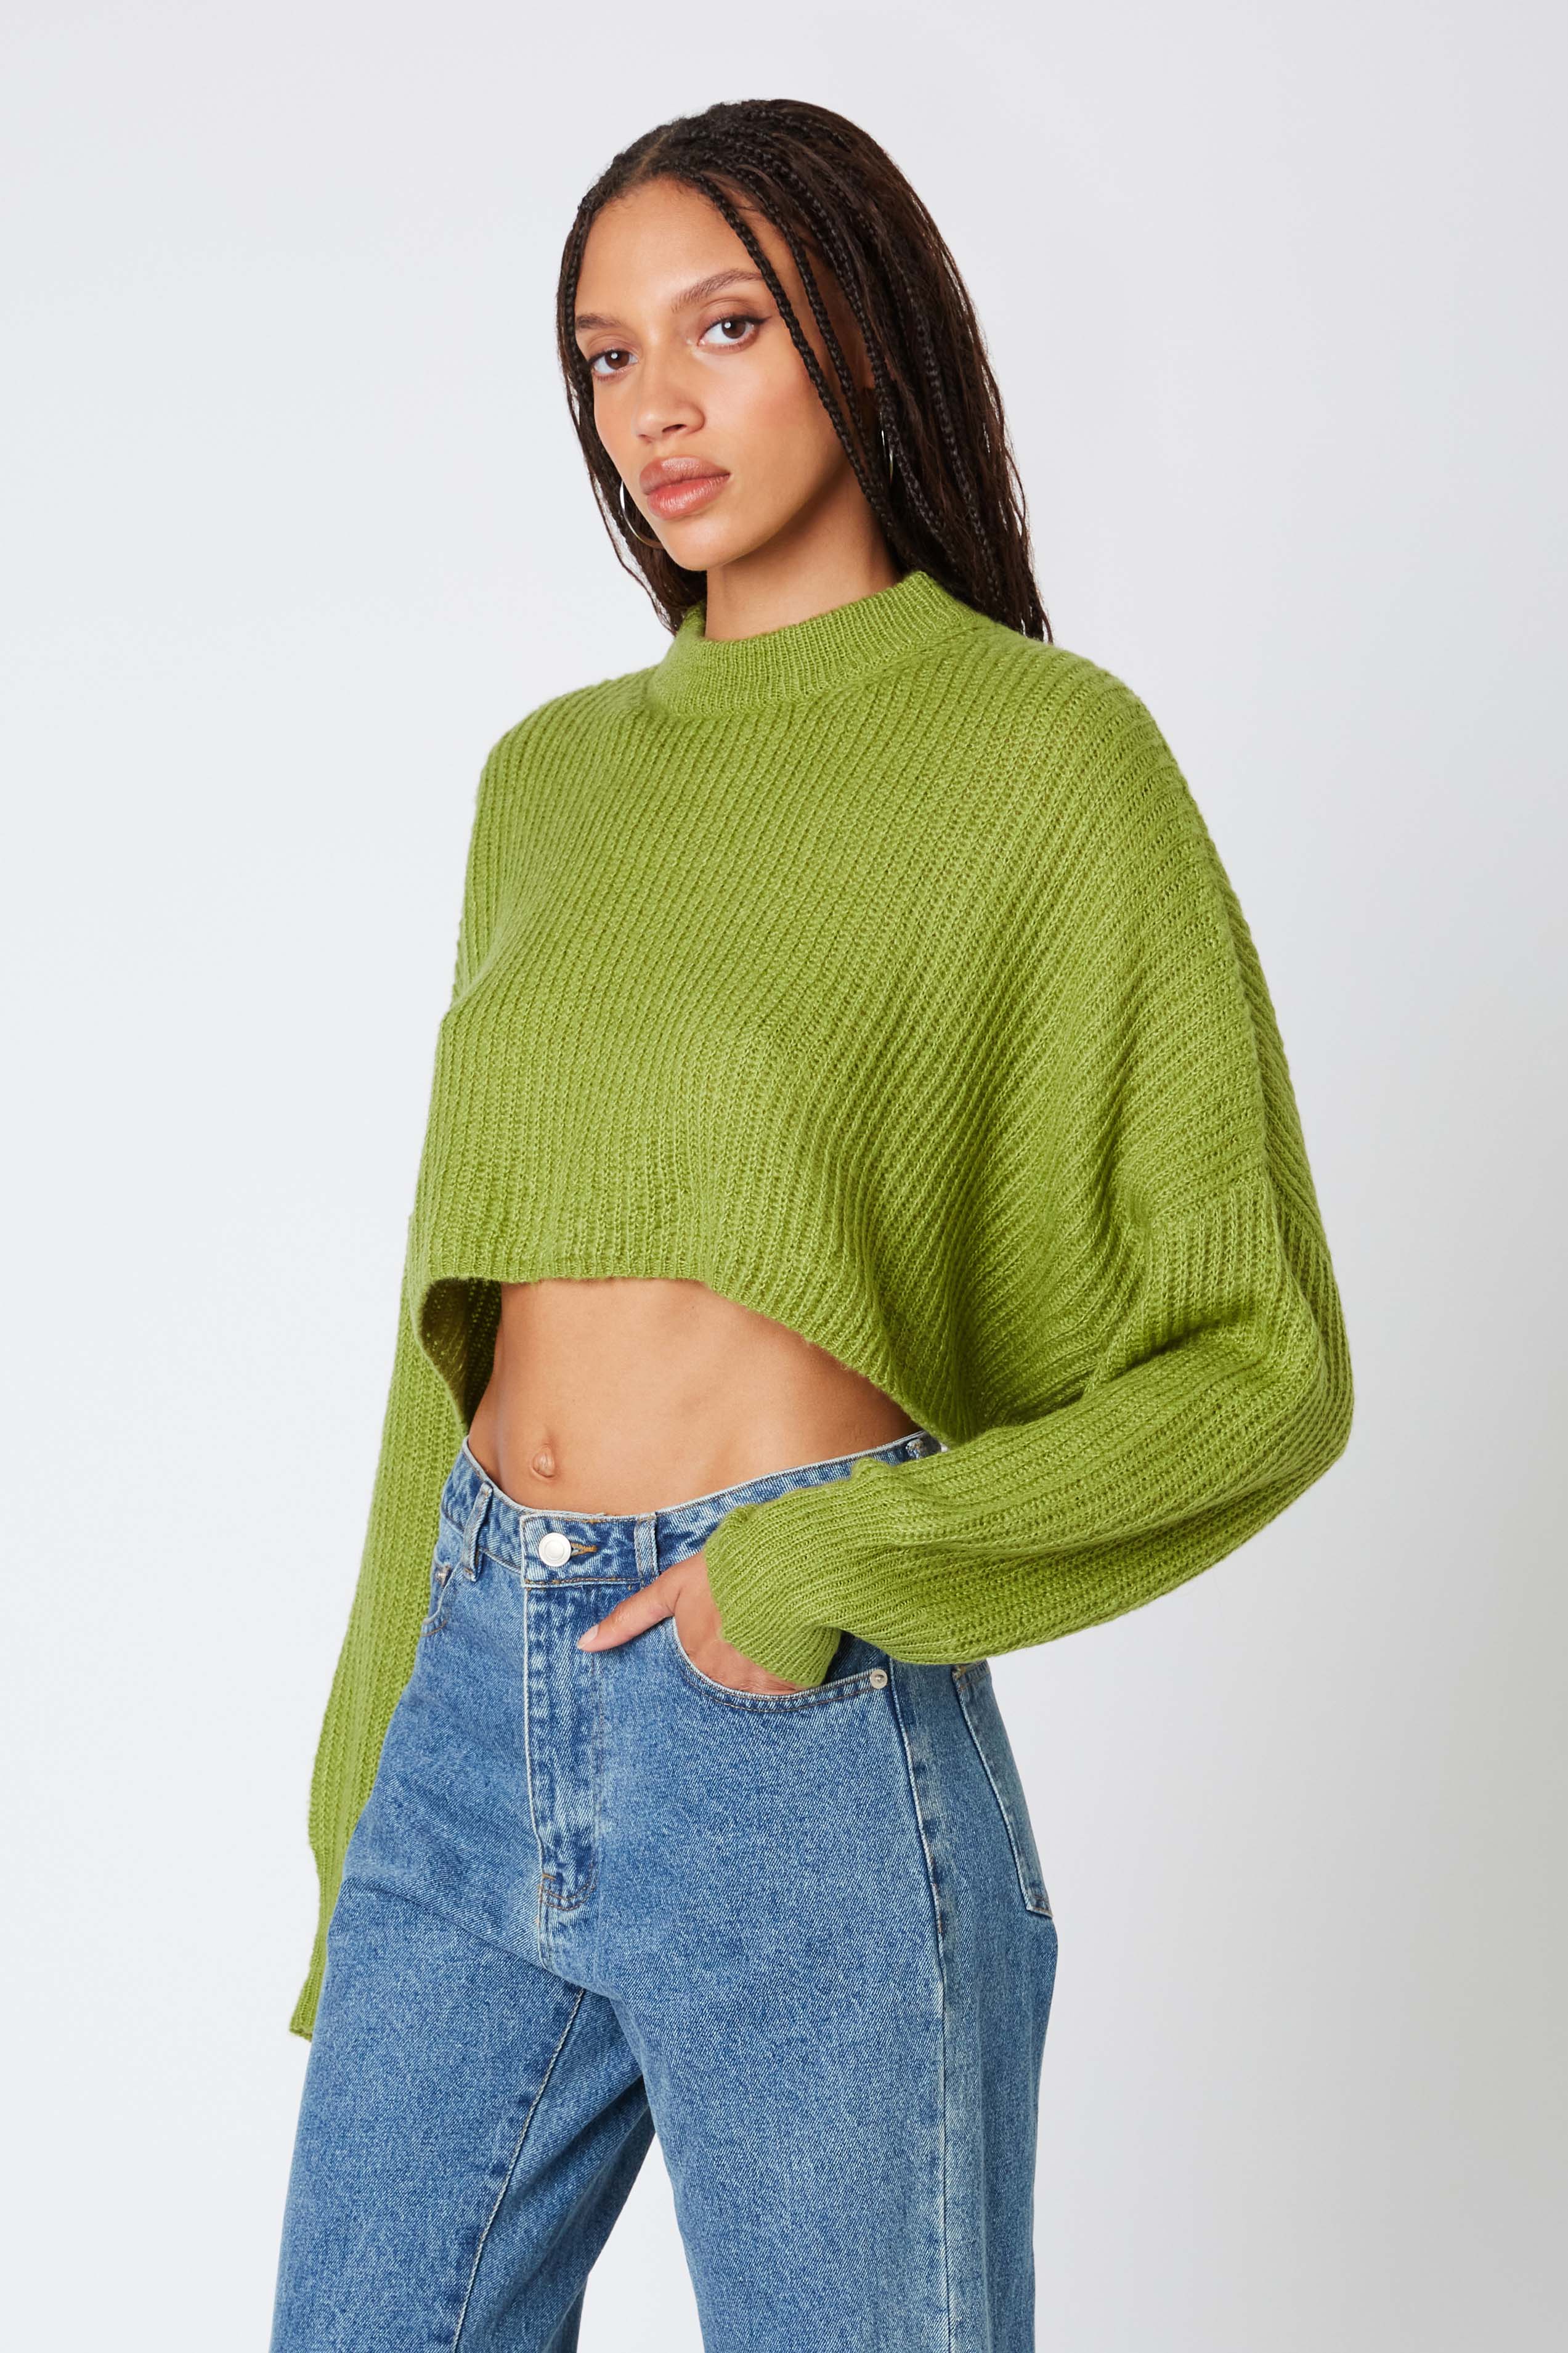 Cropped Mockneck Sweater in Basil Side View